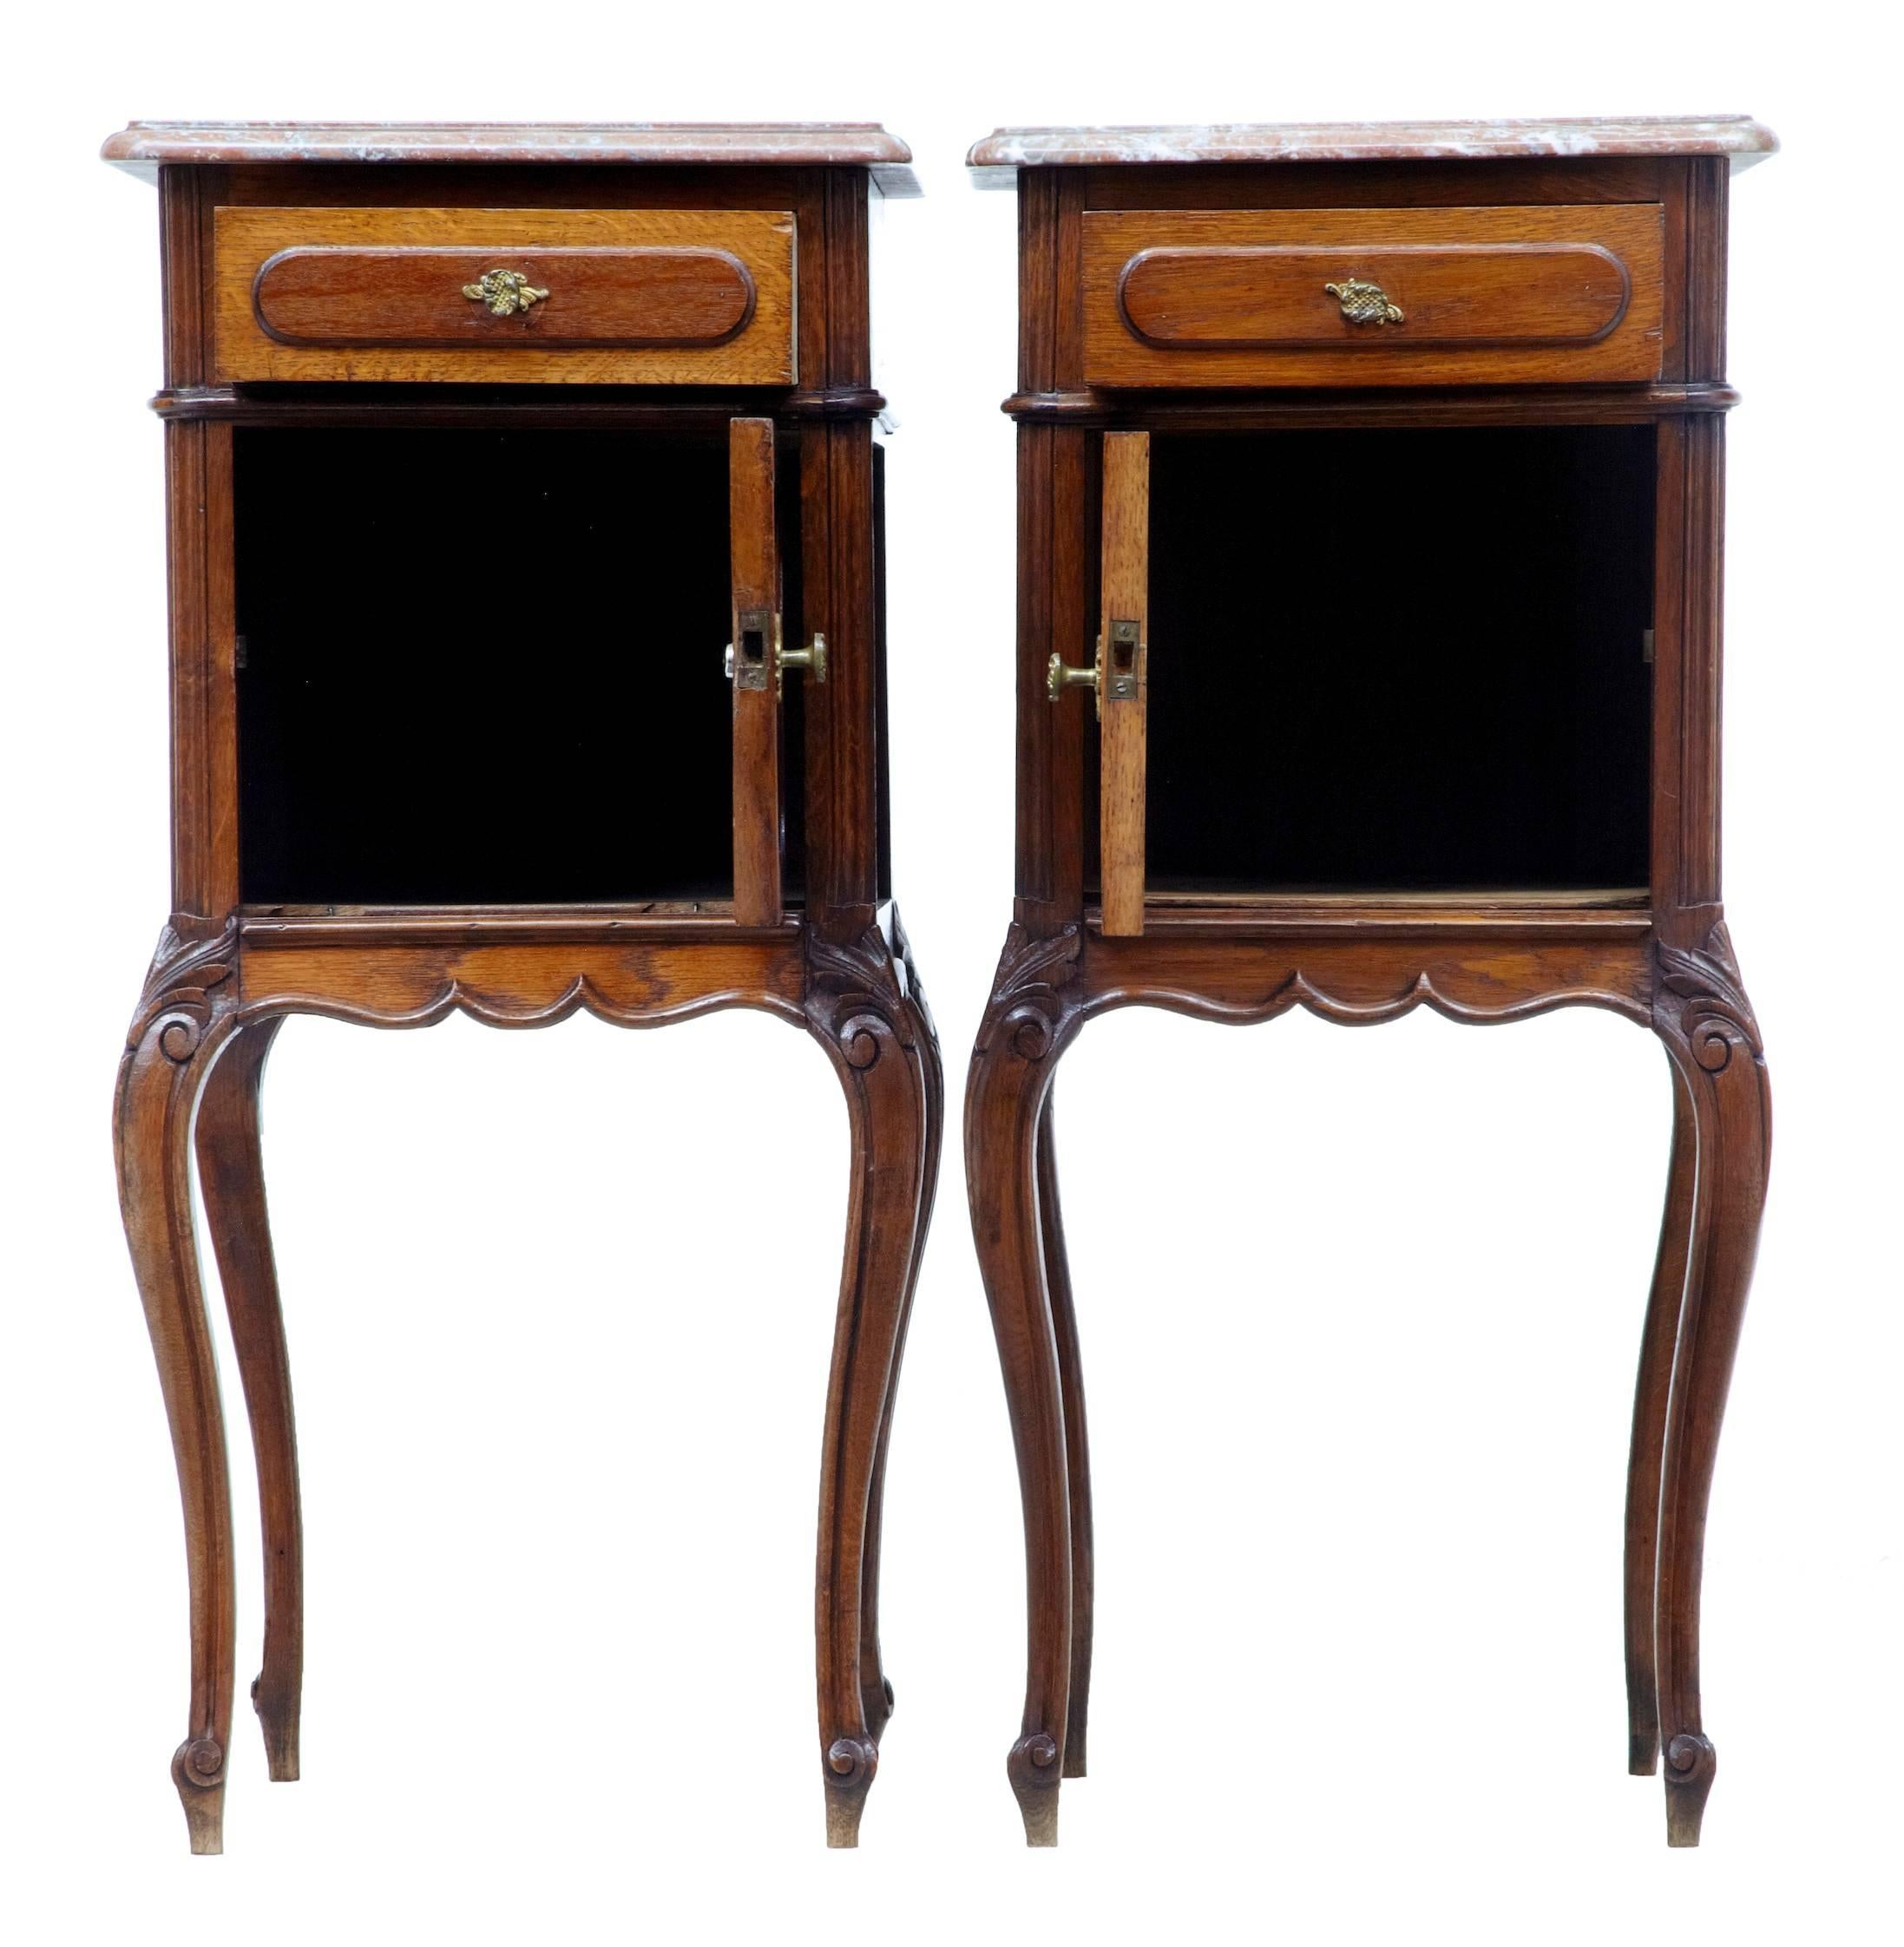 French Provincial Pair of 19th Century French Oak Marble-Top Nightstands